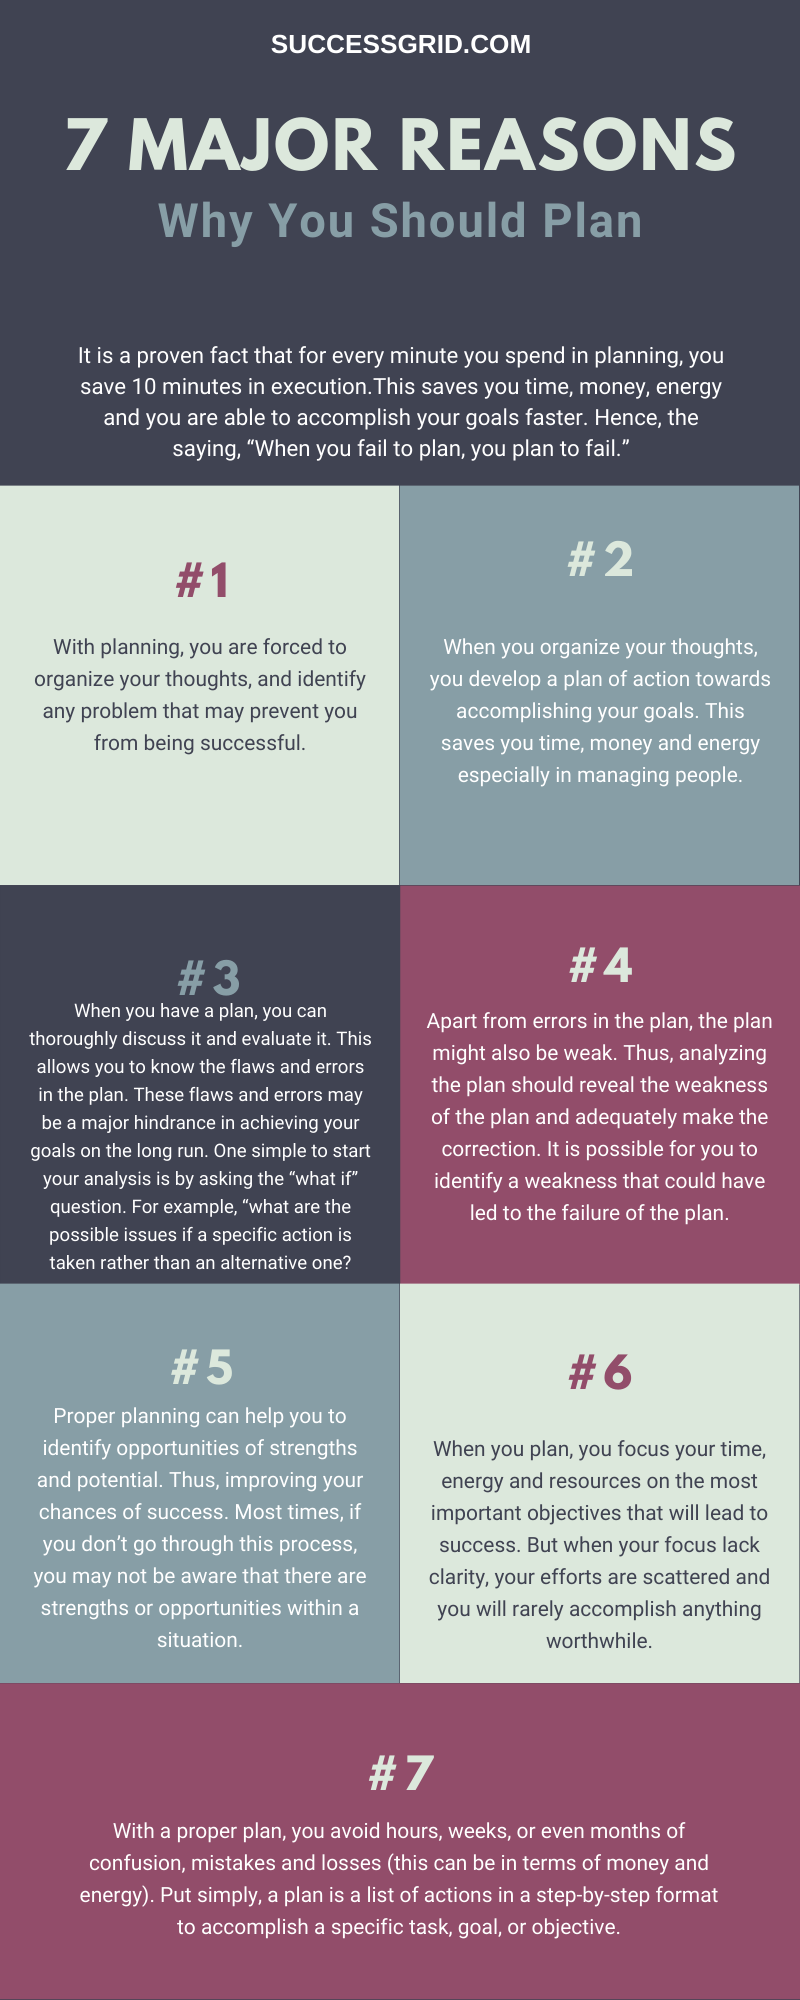 Reasons Why You Should Plan Infographic